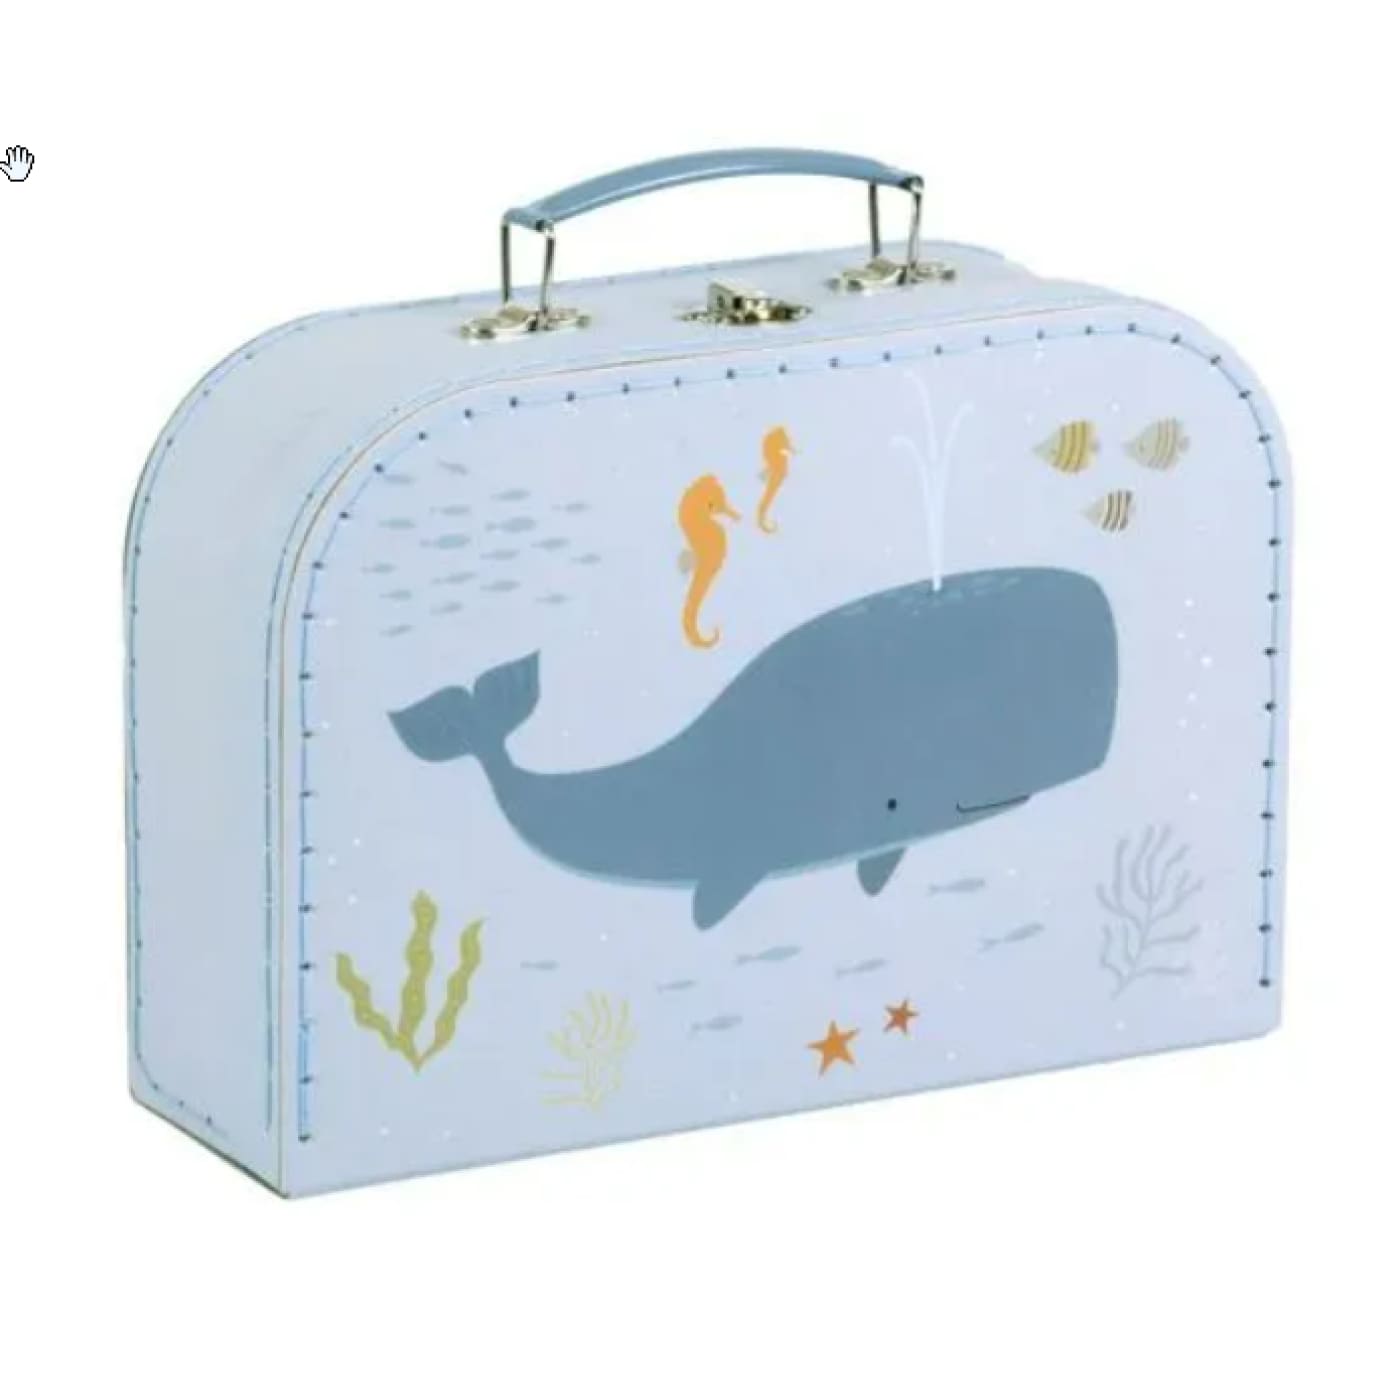 A Little Lovely Company Suitcase Small Oean - Ocean - GIFTWARE - KEEPSAKES